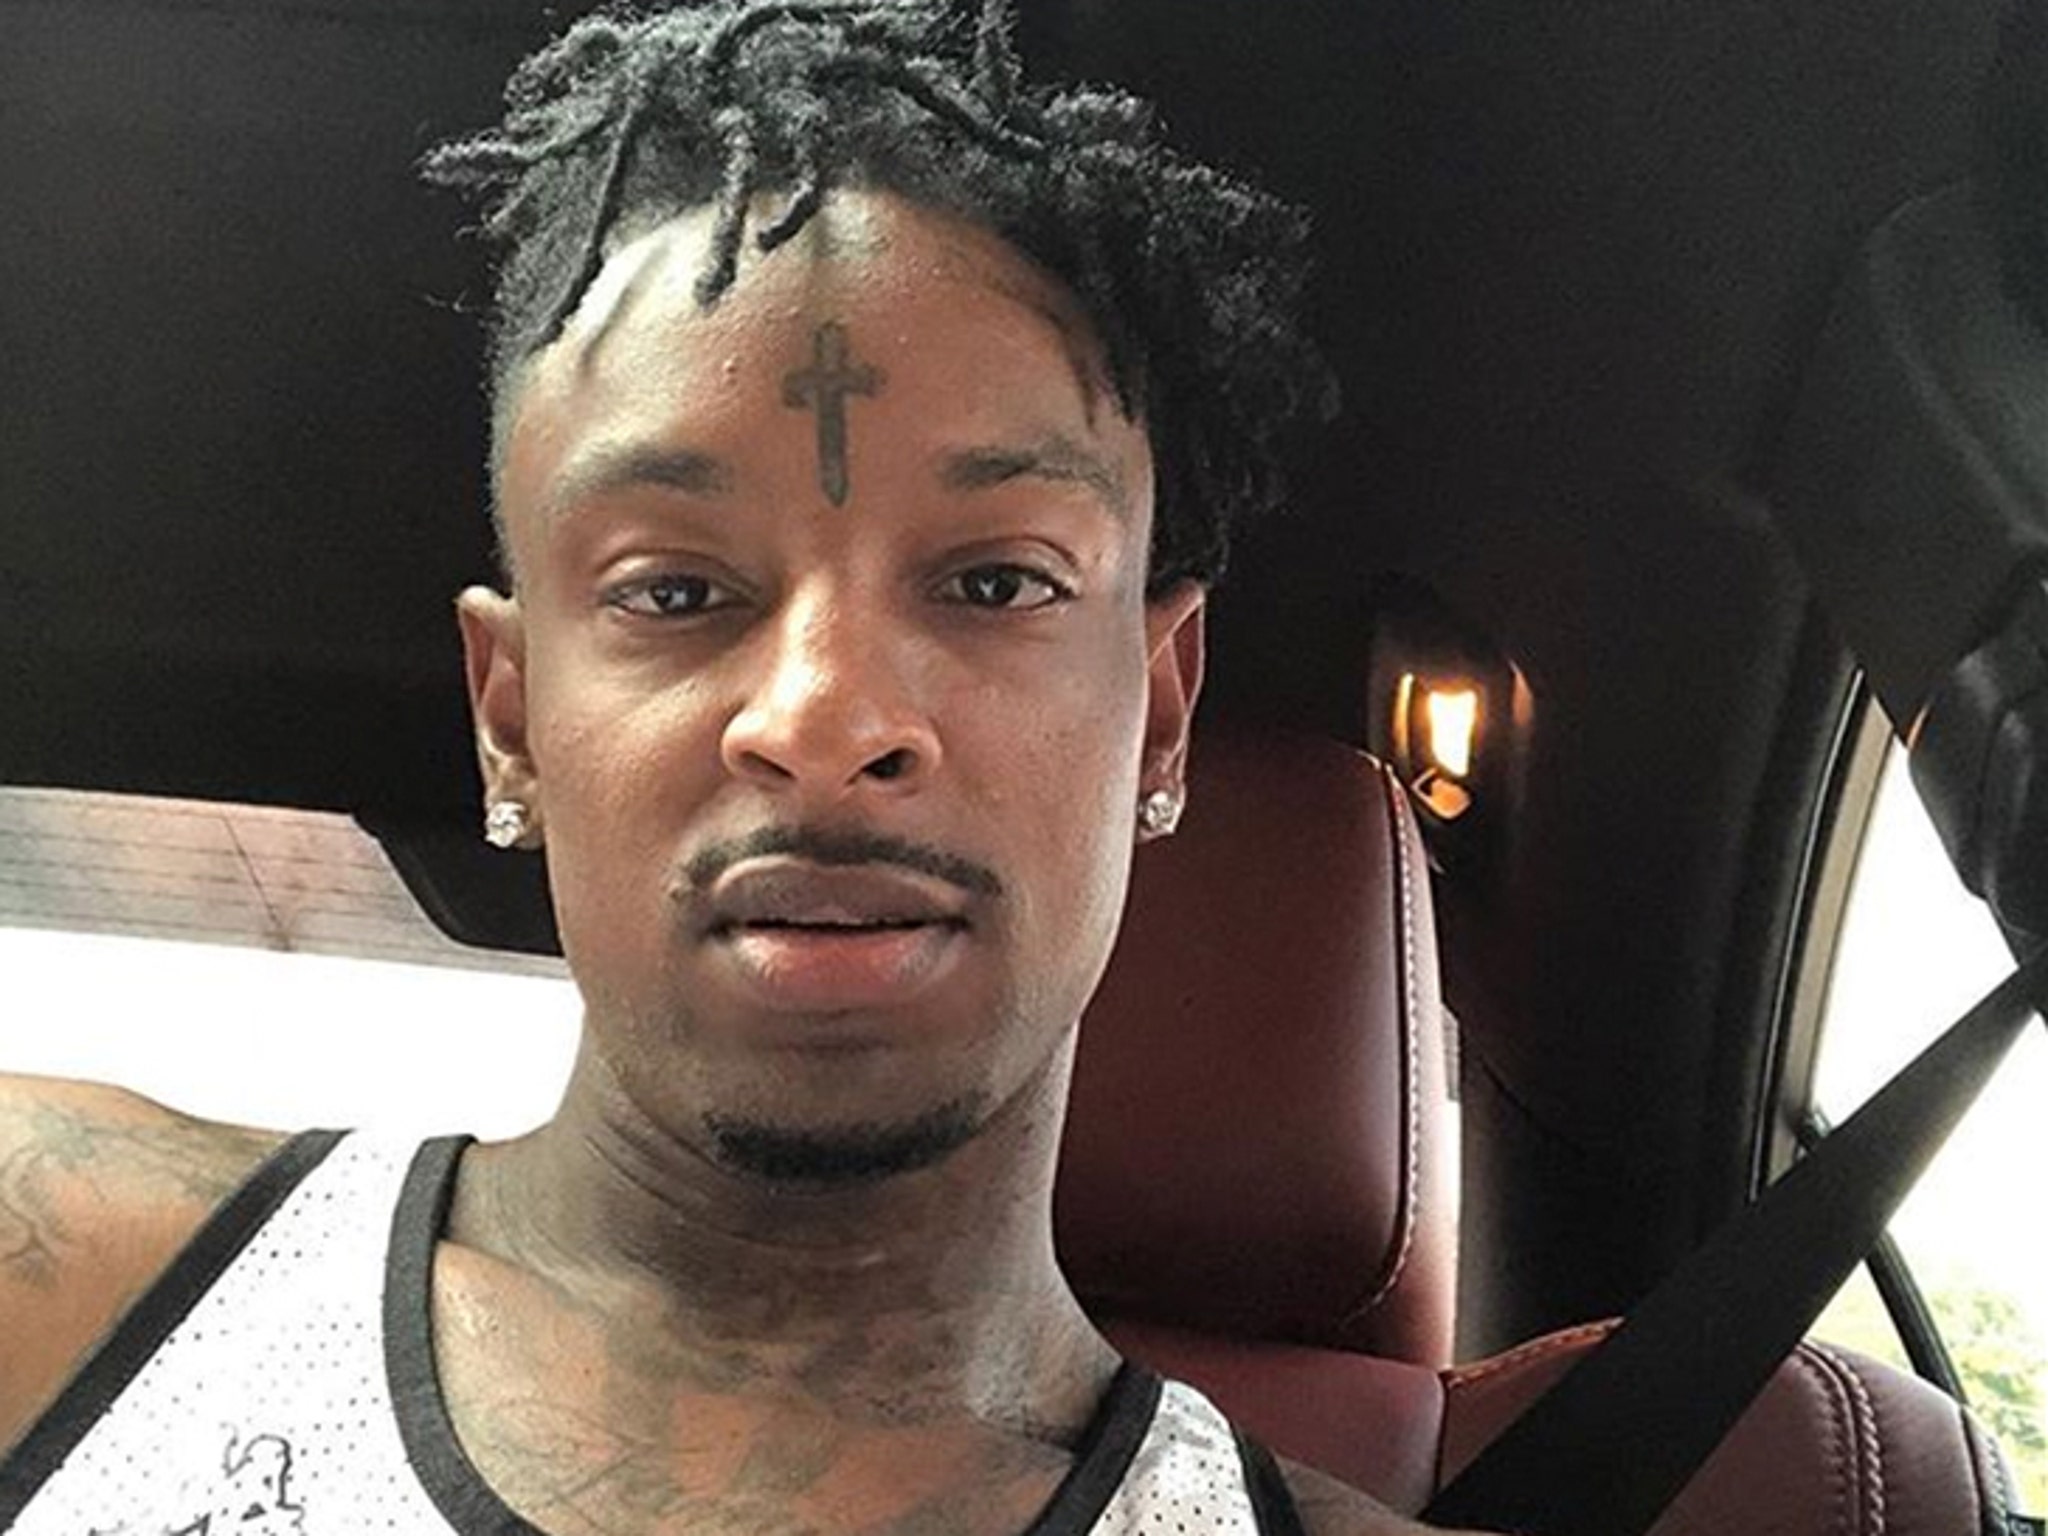 21 Savage claims his 2019 traffic stop was unlawful